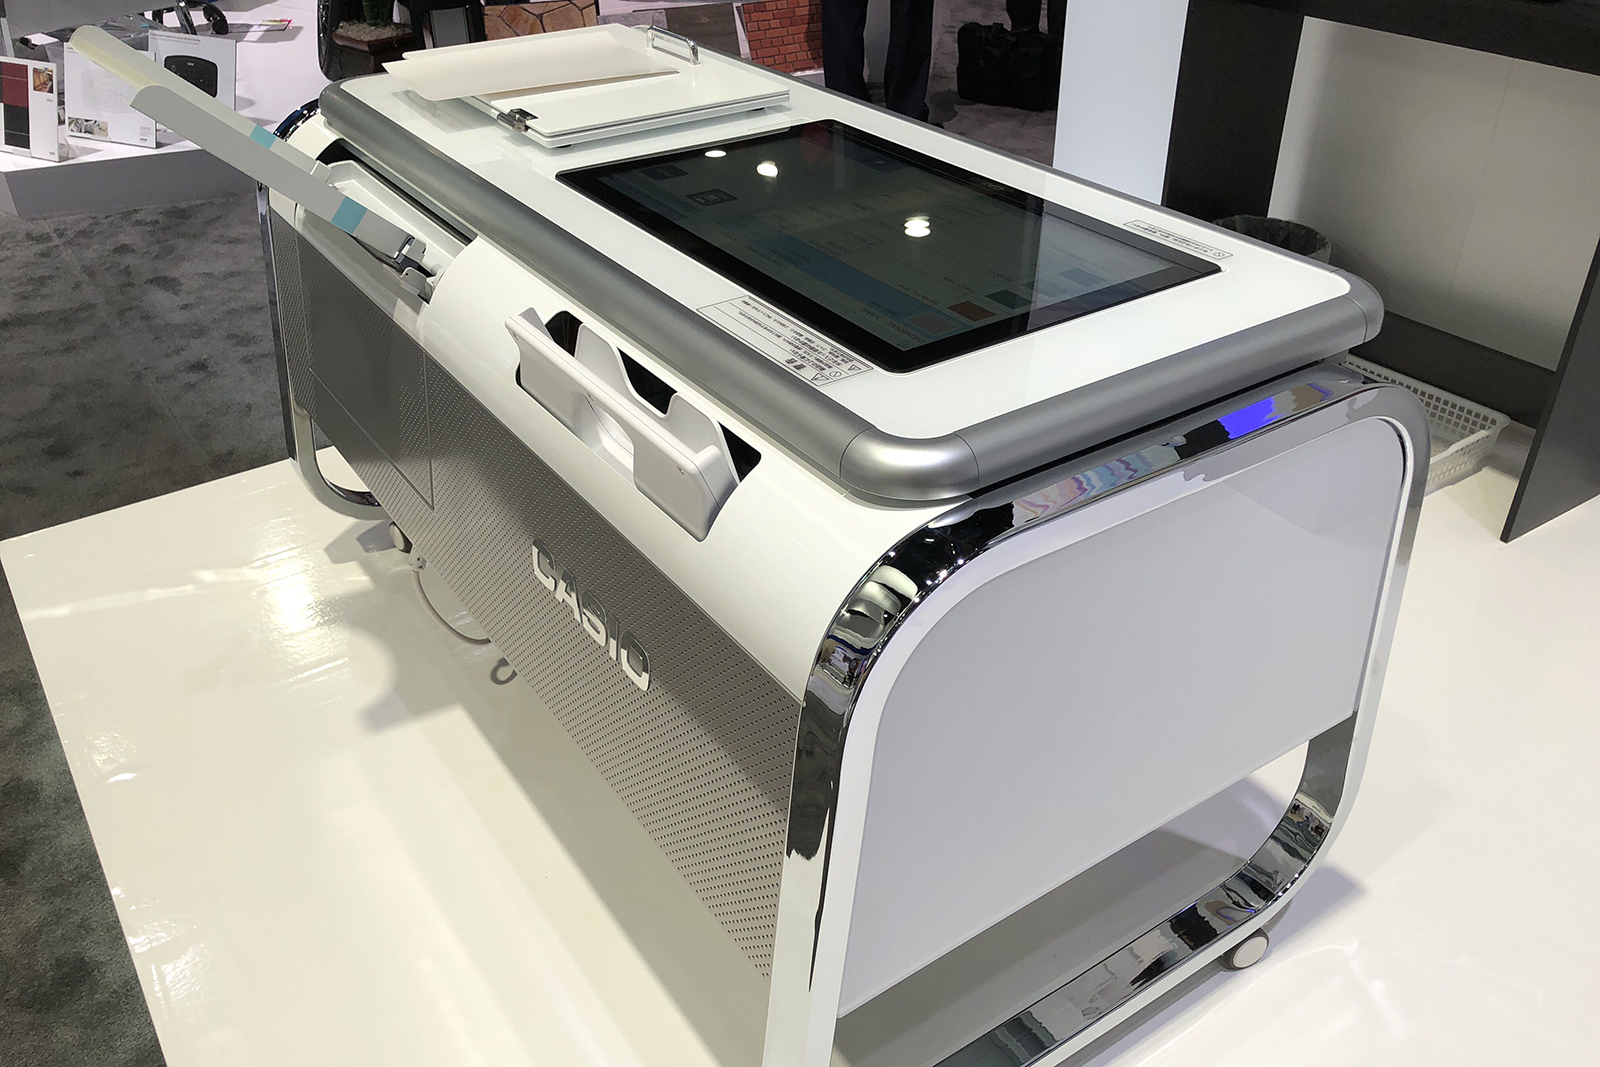 casio mofrel 25d printer ces2018 image uploaded from ios 10